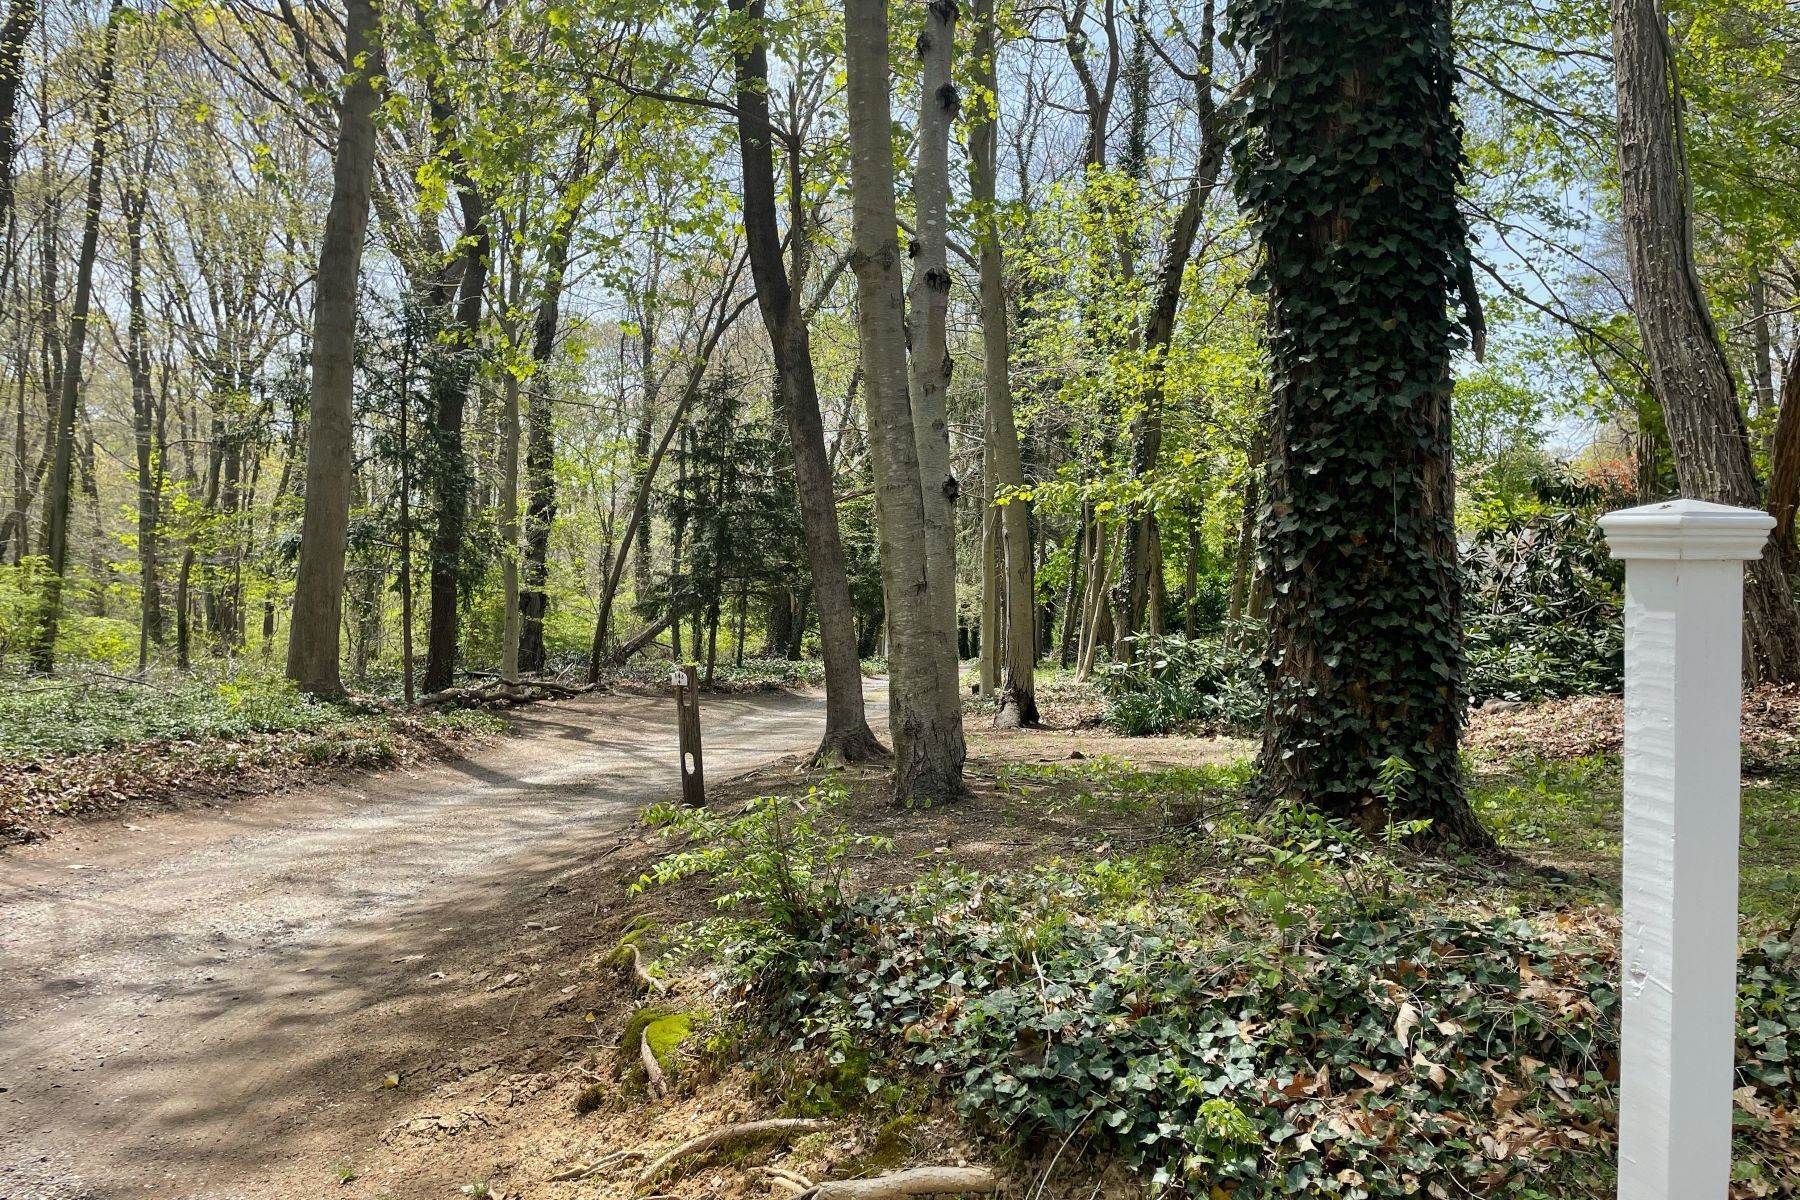 Land for Sale at Piping Rock Road, Glen Cove, NY, 11542 Piping Rock Road Glen Cove, New York 11542 United States